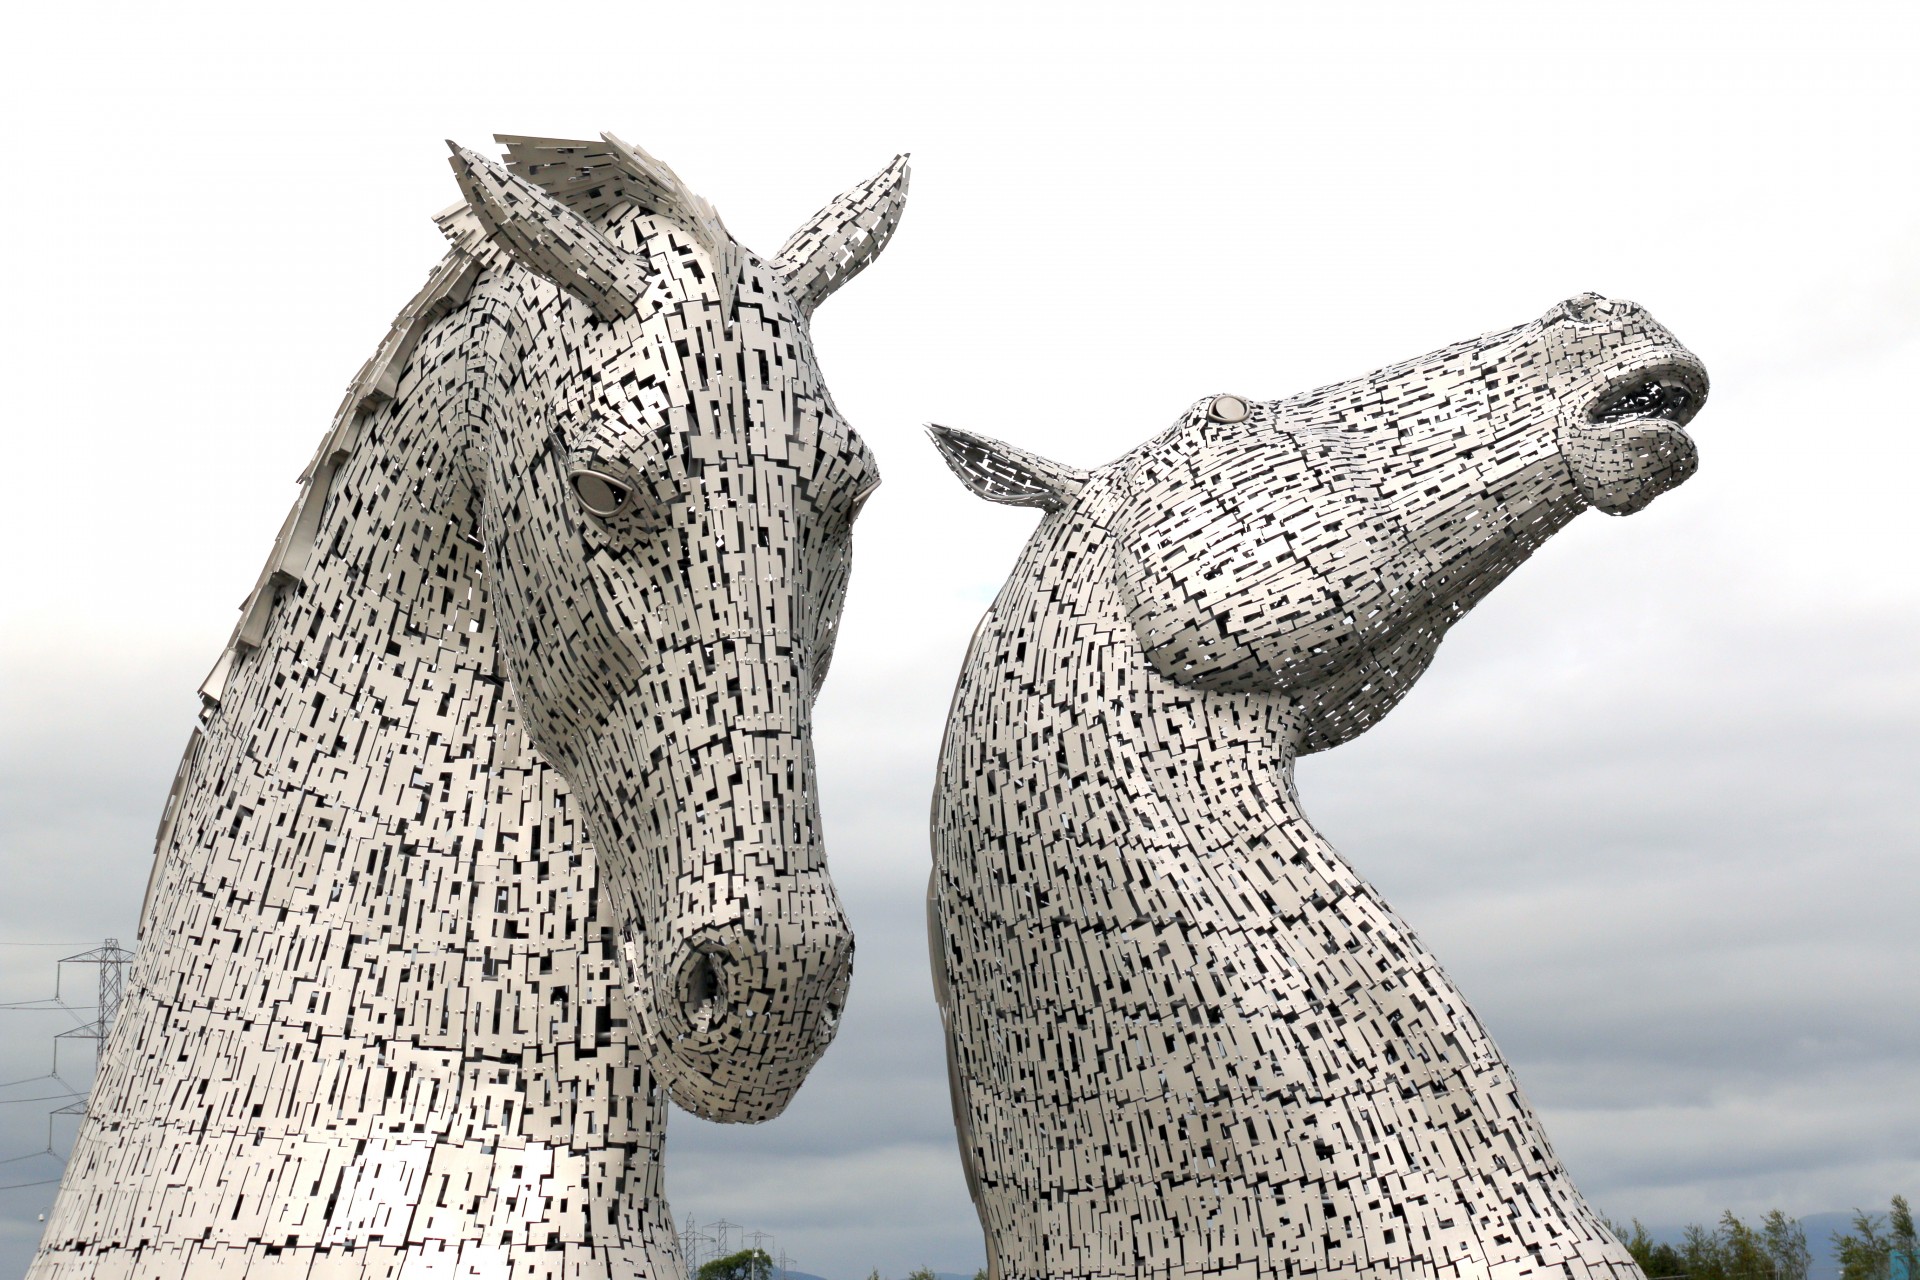 Two horse head statues, located at `The Helix', Falkirk, Scotland.